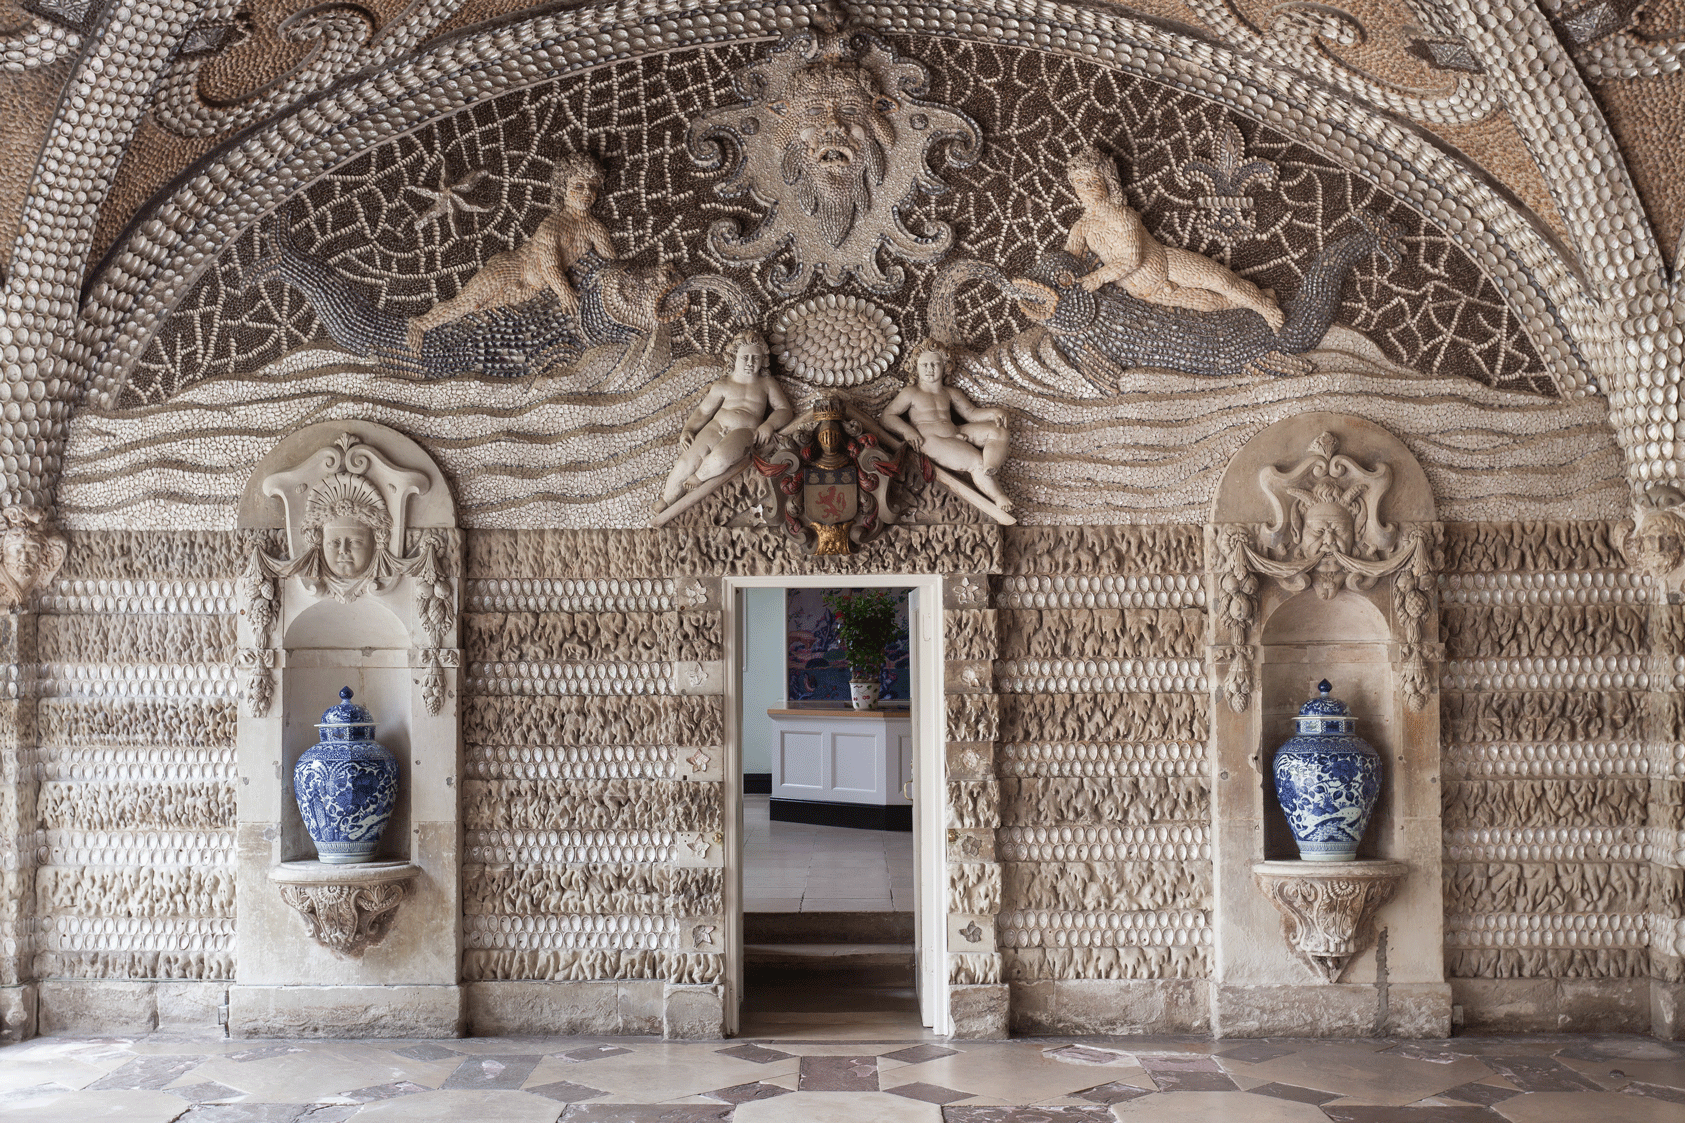 The ornate ceiling of Woburn Abbey's shell grotto